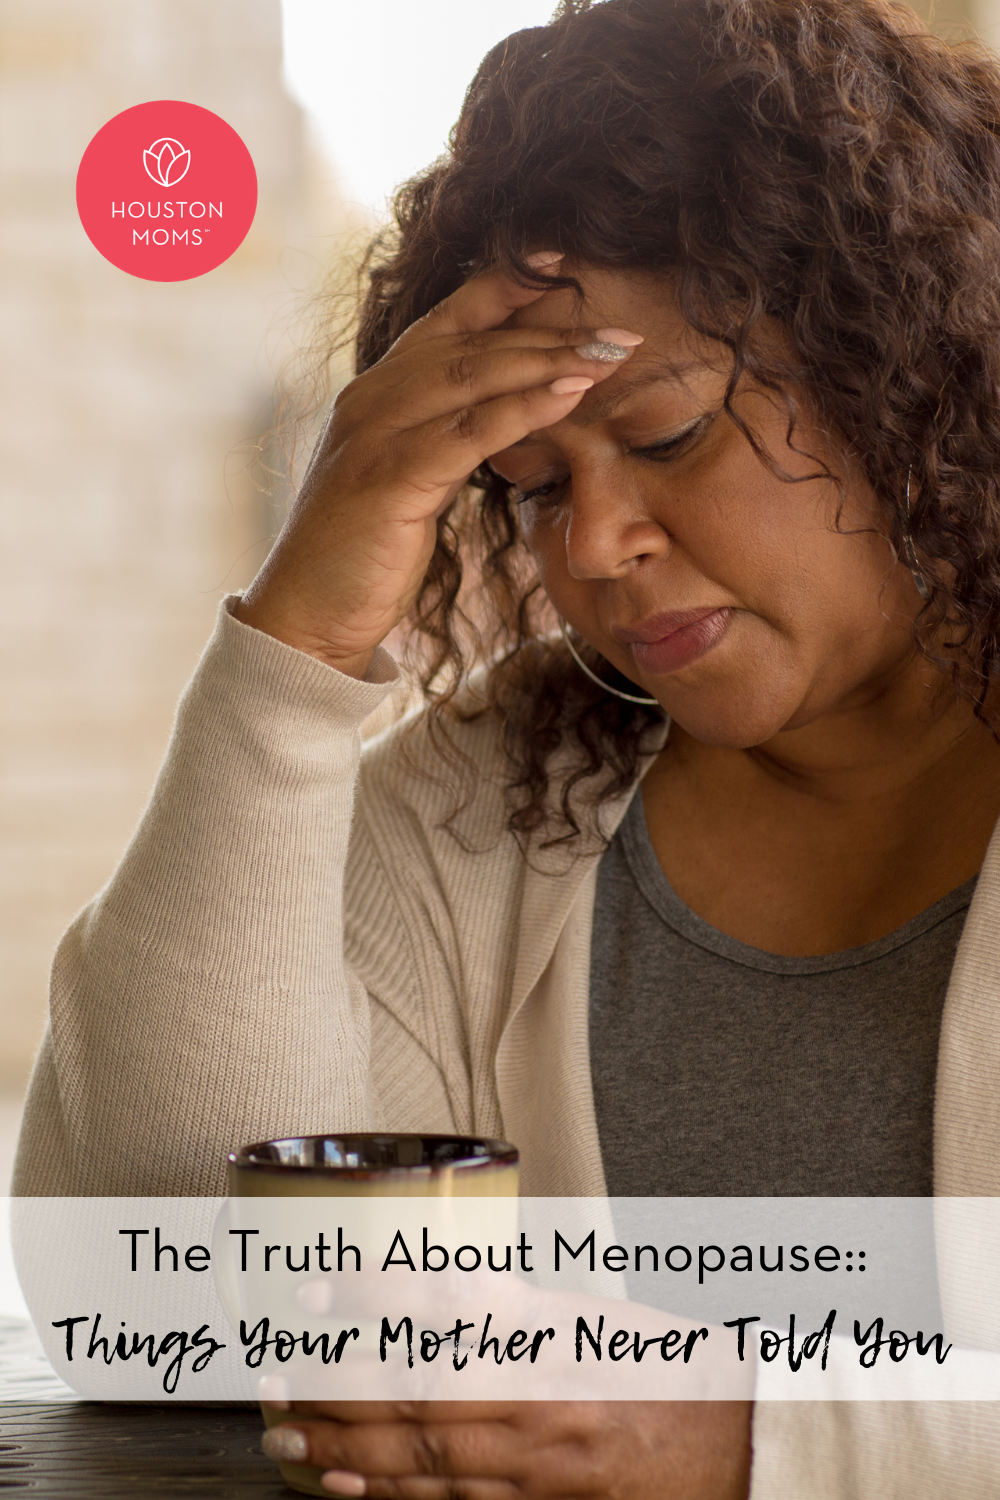 Houston Moms "The Truth about Menopause:: Things Your Mother Never Told You" #houstonmoms #momsaroundhouston